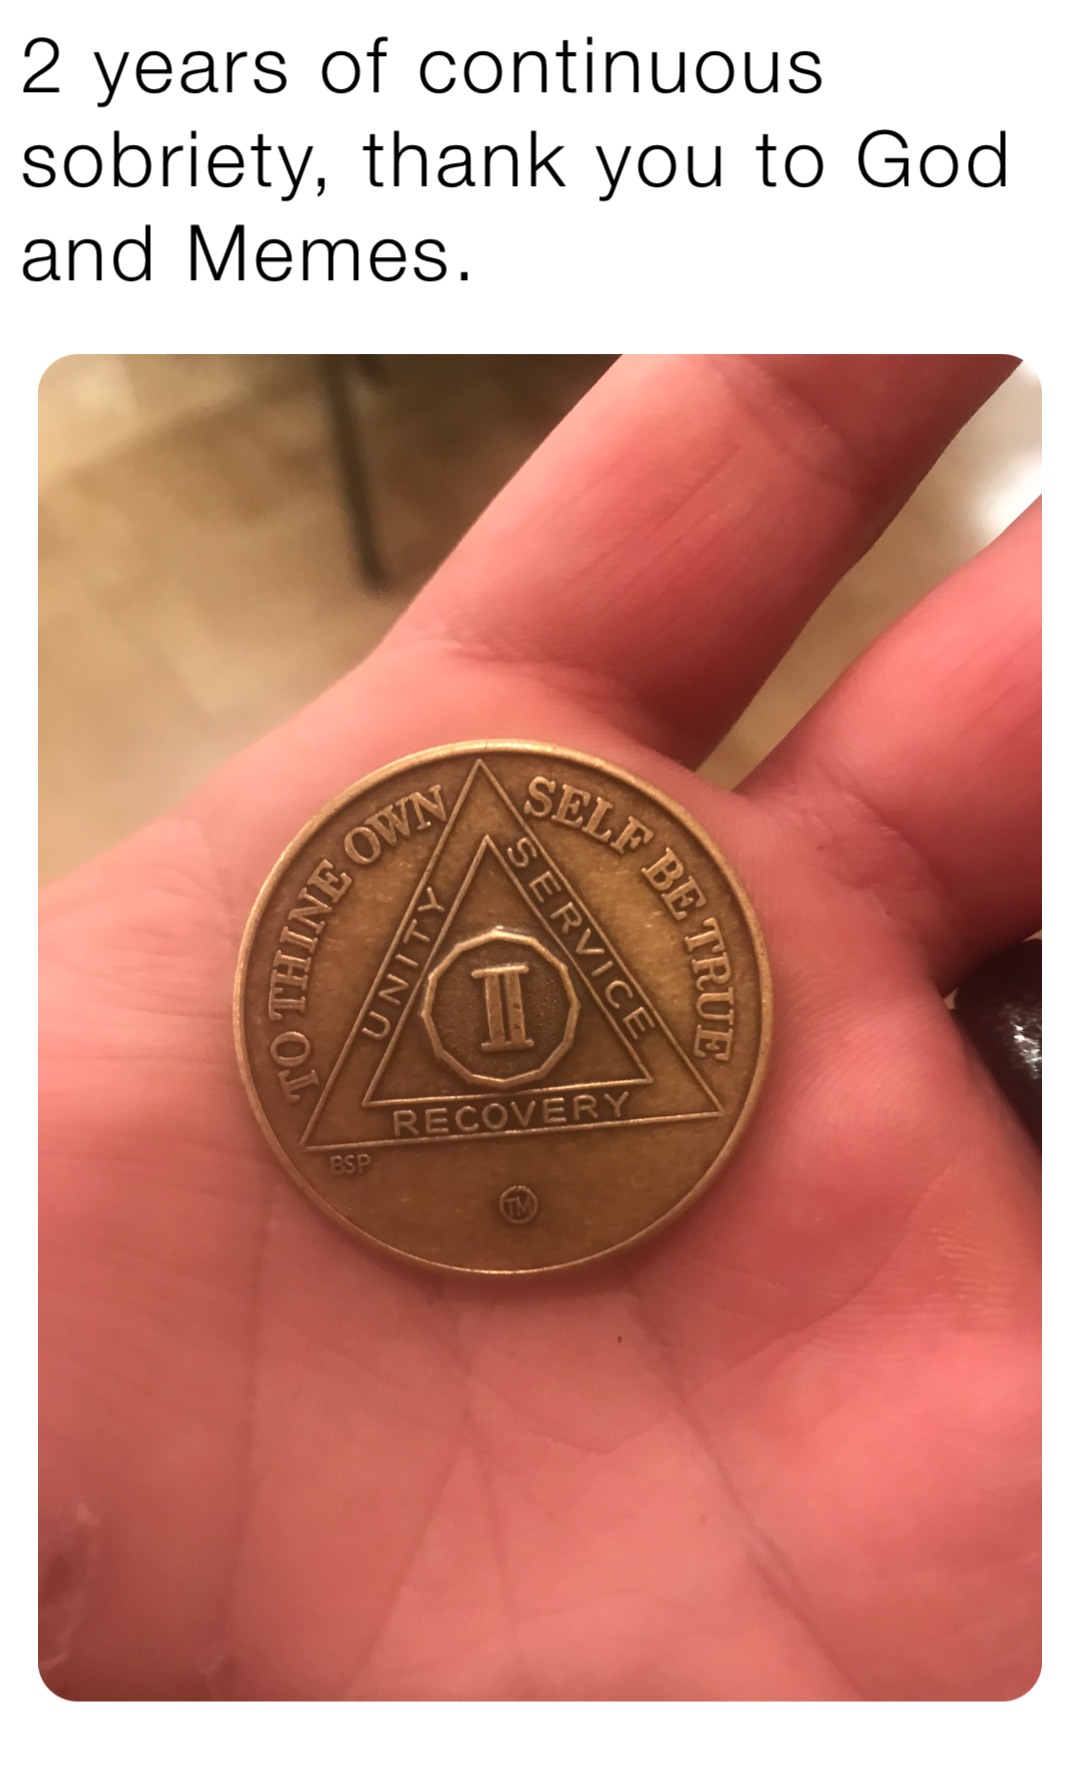 2 years of continuous sobriety, thank you to God and Memes.